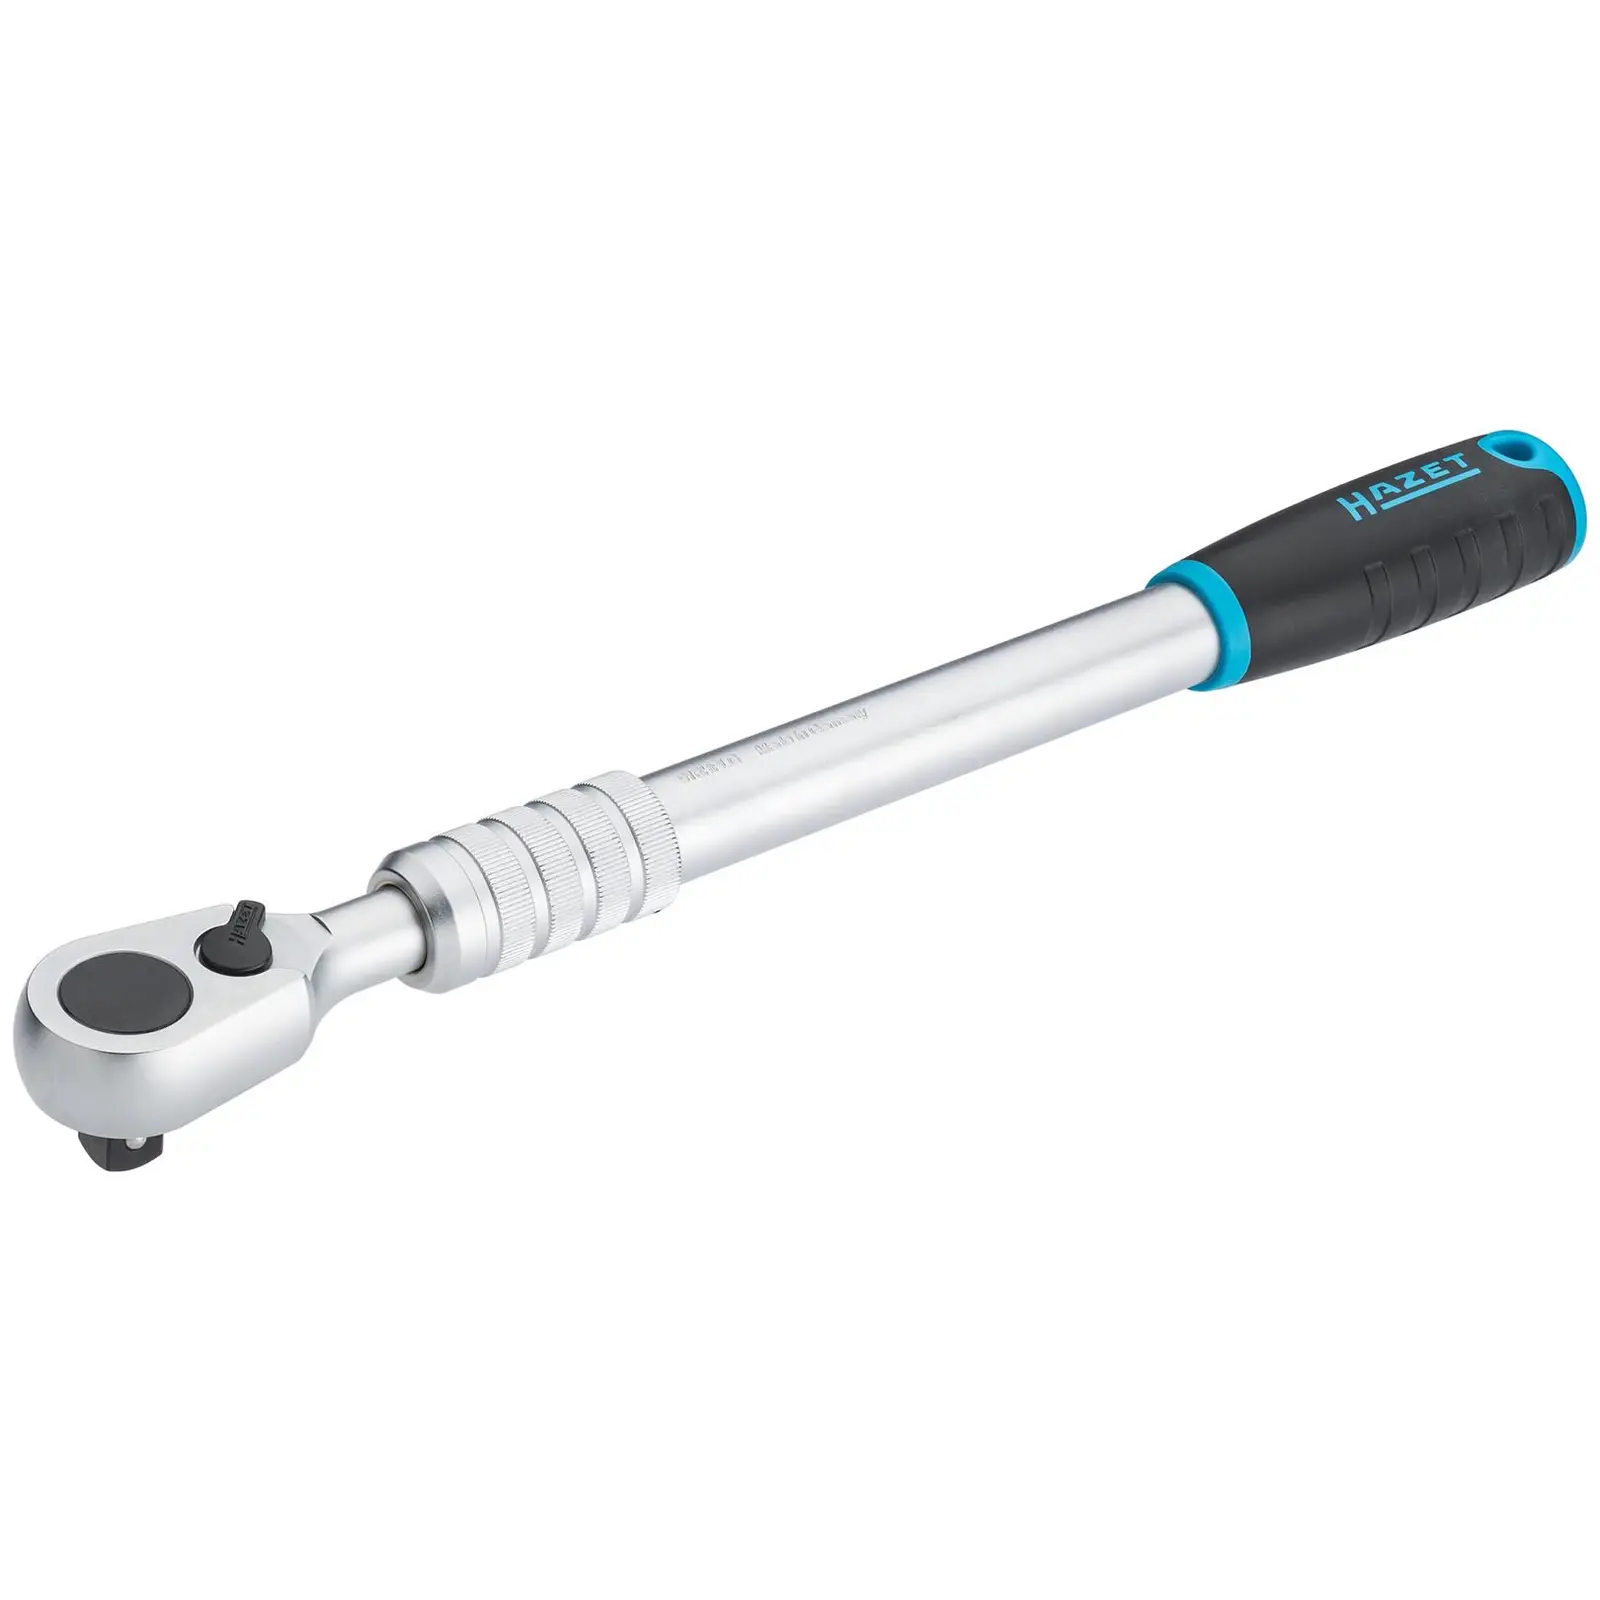 Ratchet Wrench - 90 teeth - 41 cm - extendable